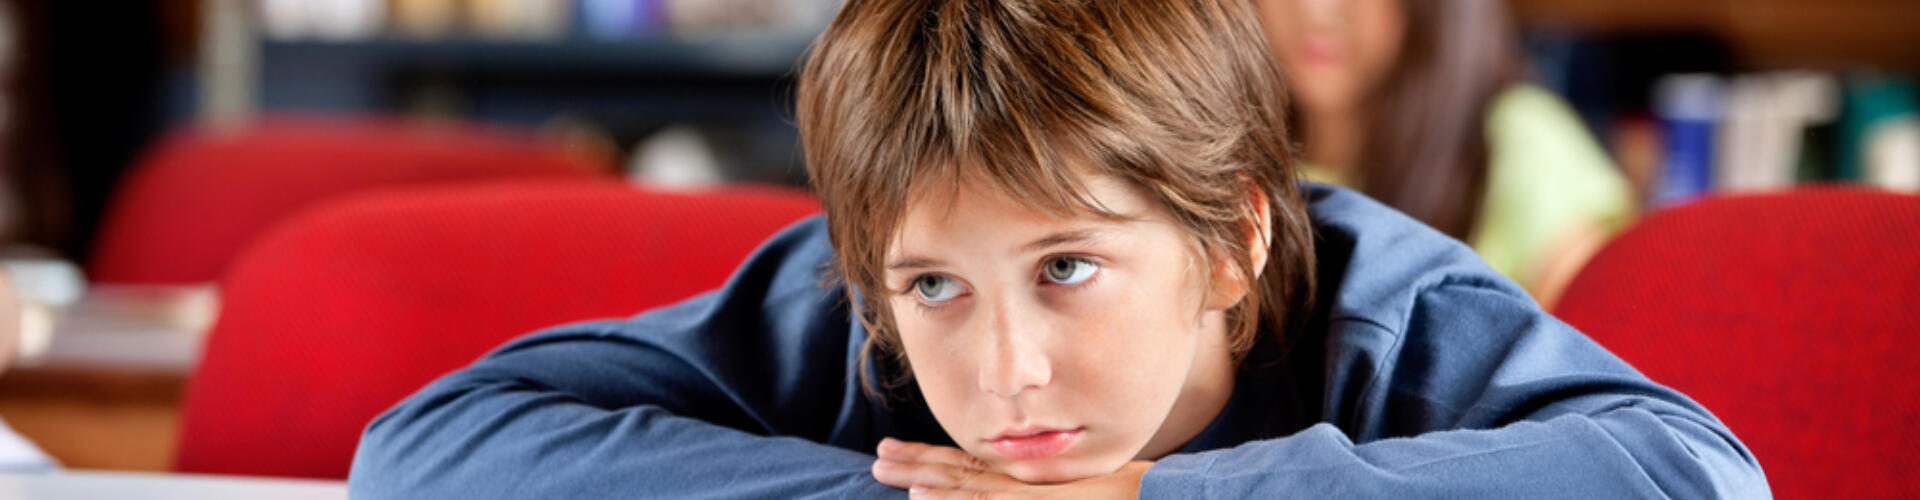 Counseling for Gifted Children | Psychowellness Center